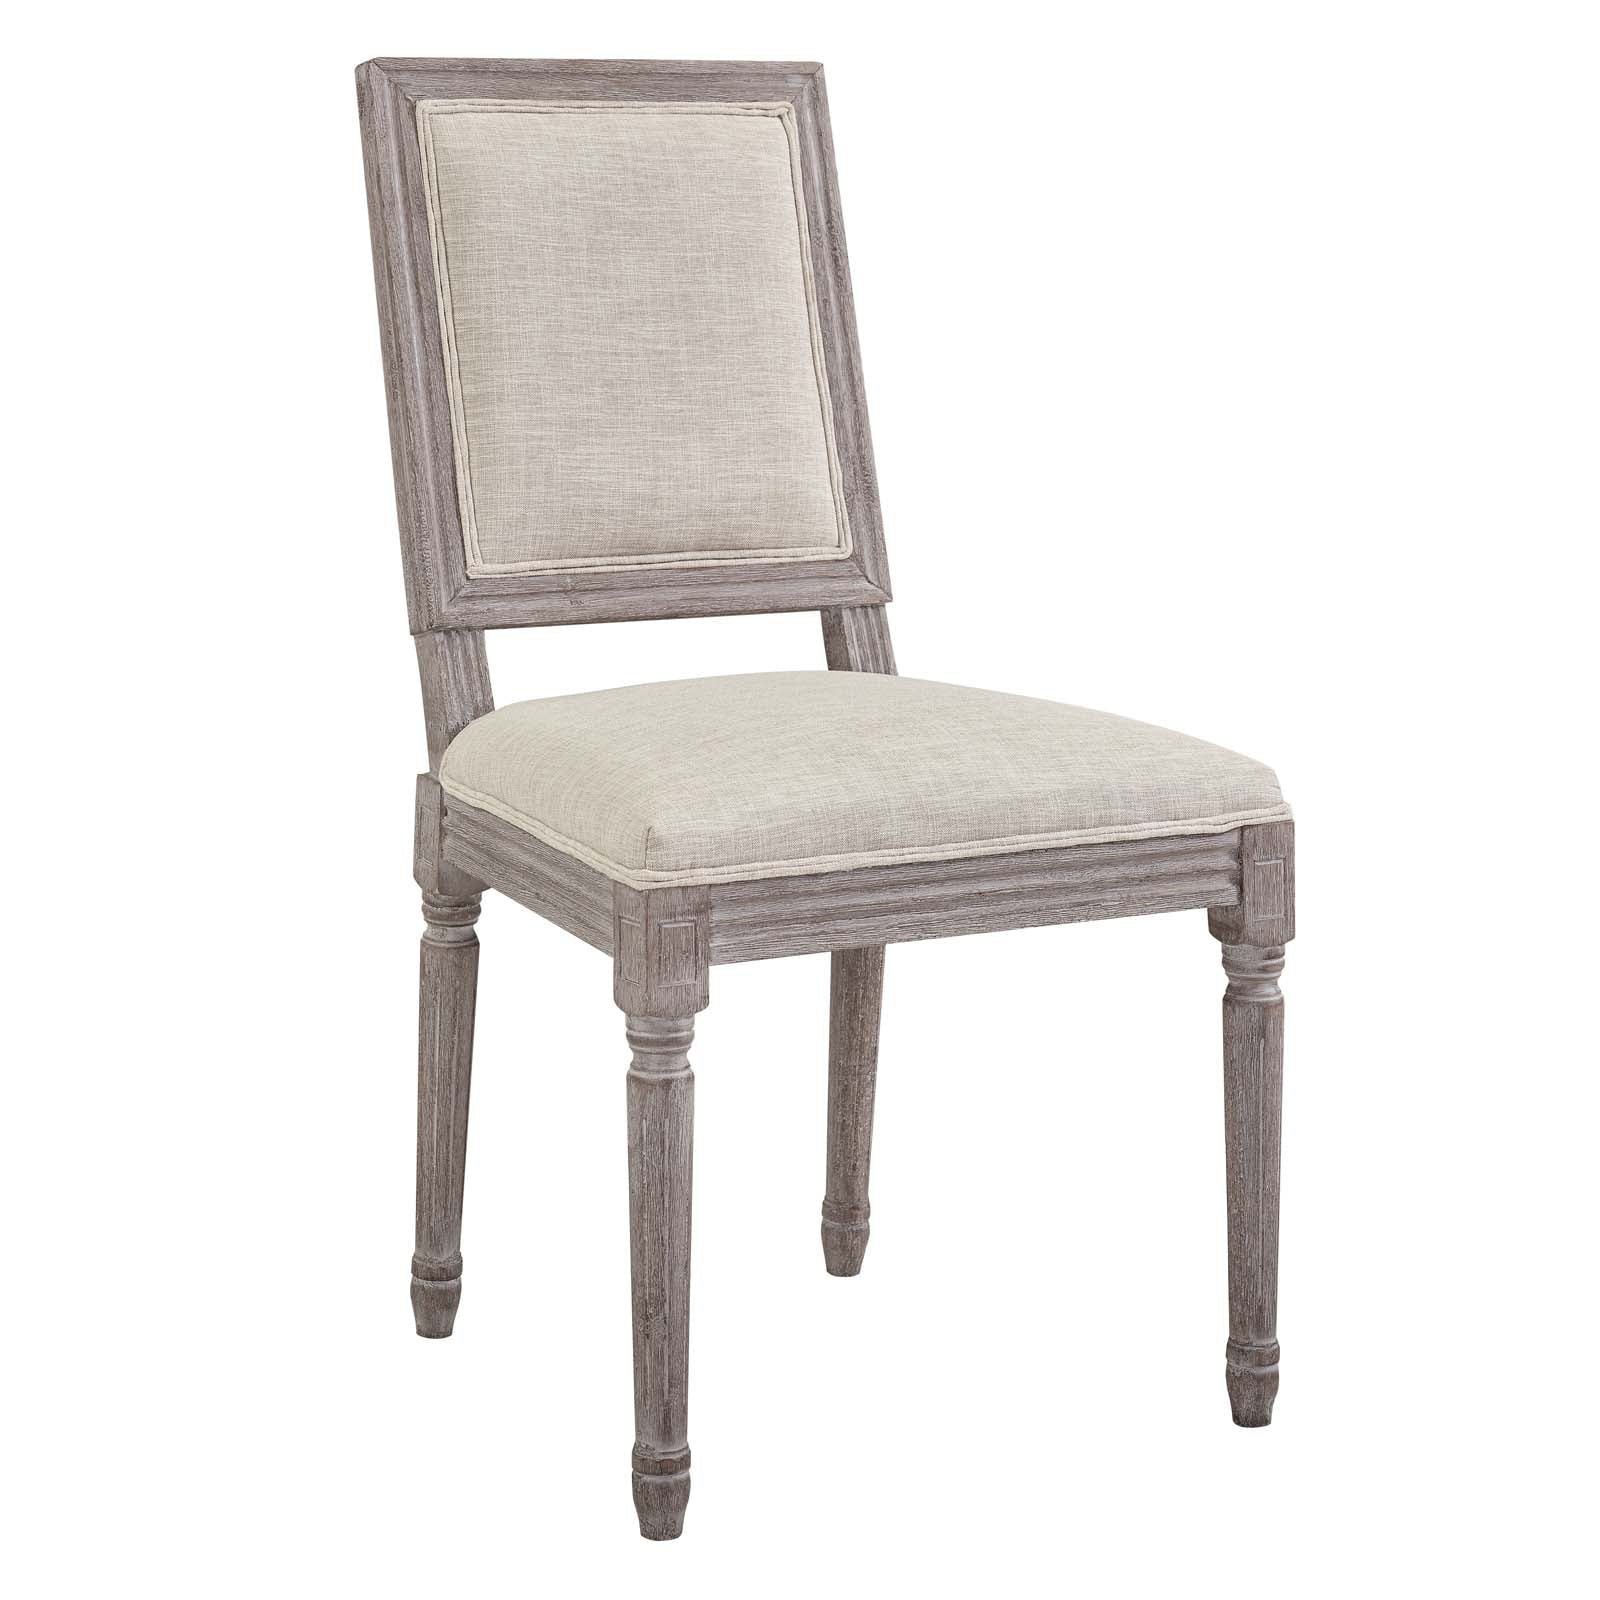 Court Vintage French Upholstered Fabric Dining Side Chair - East Shore Modern Home Furnishings